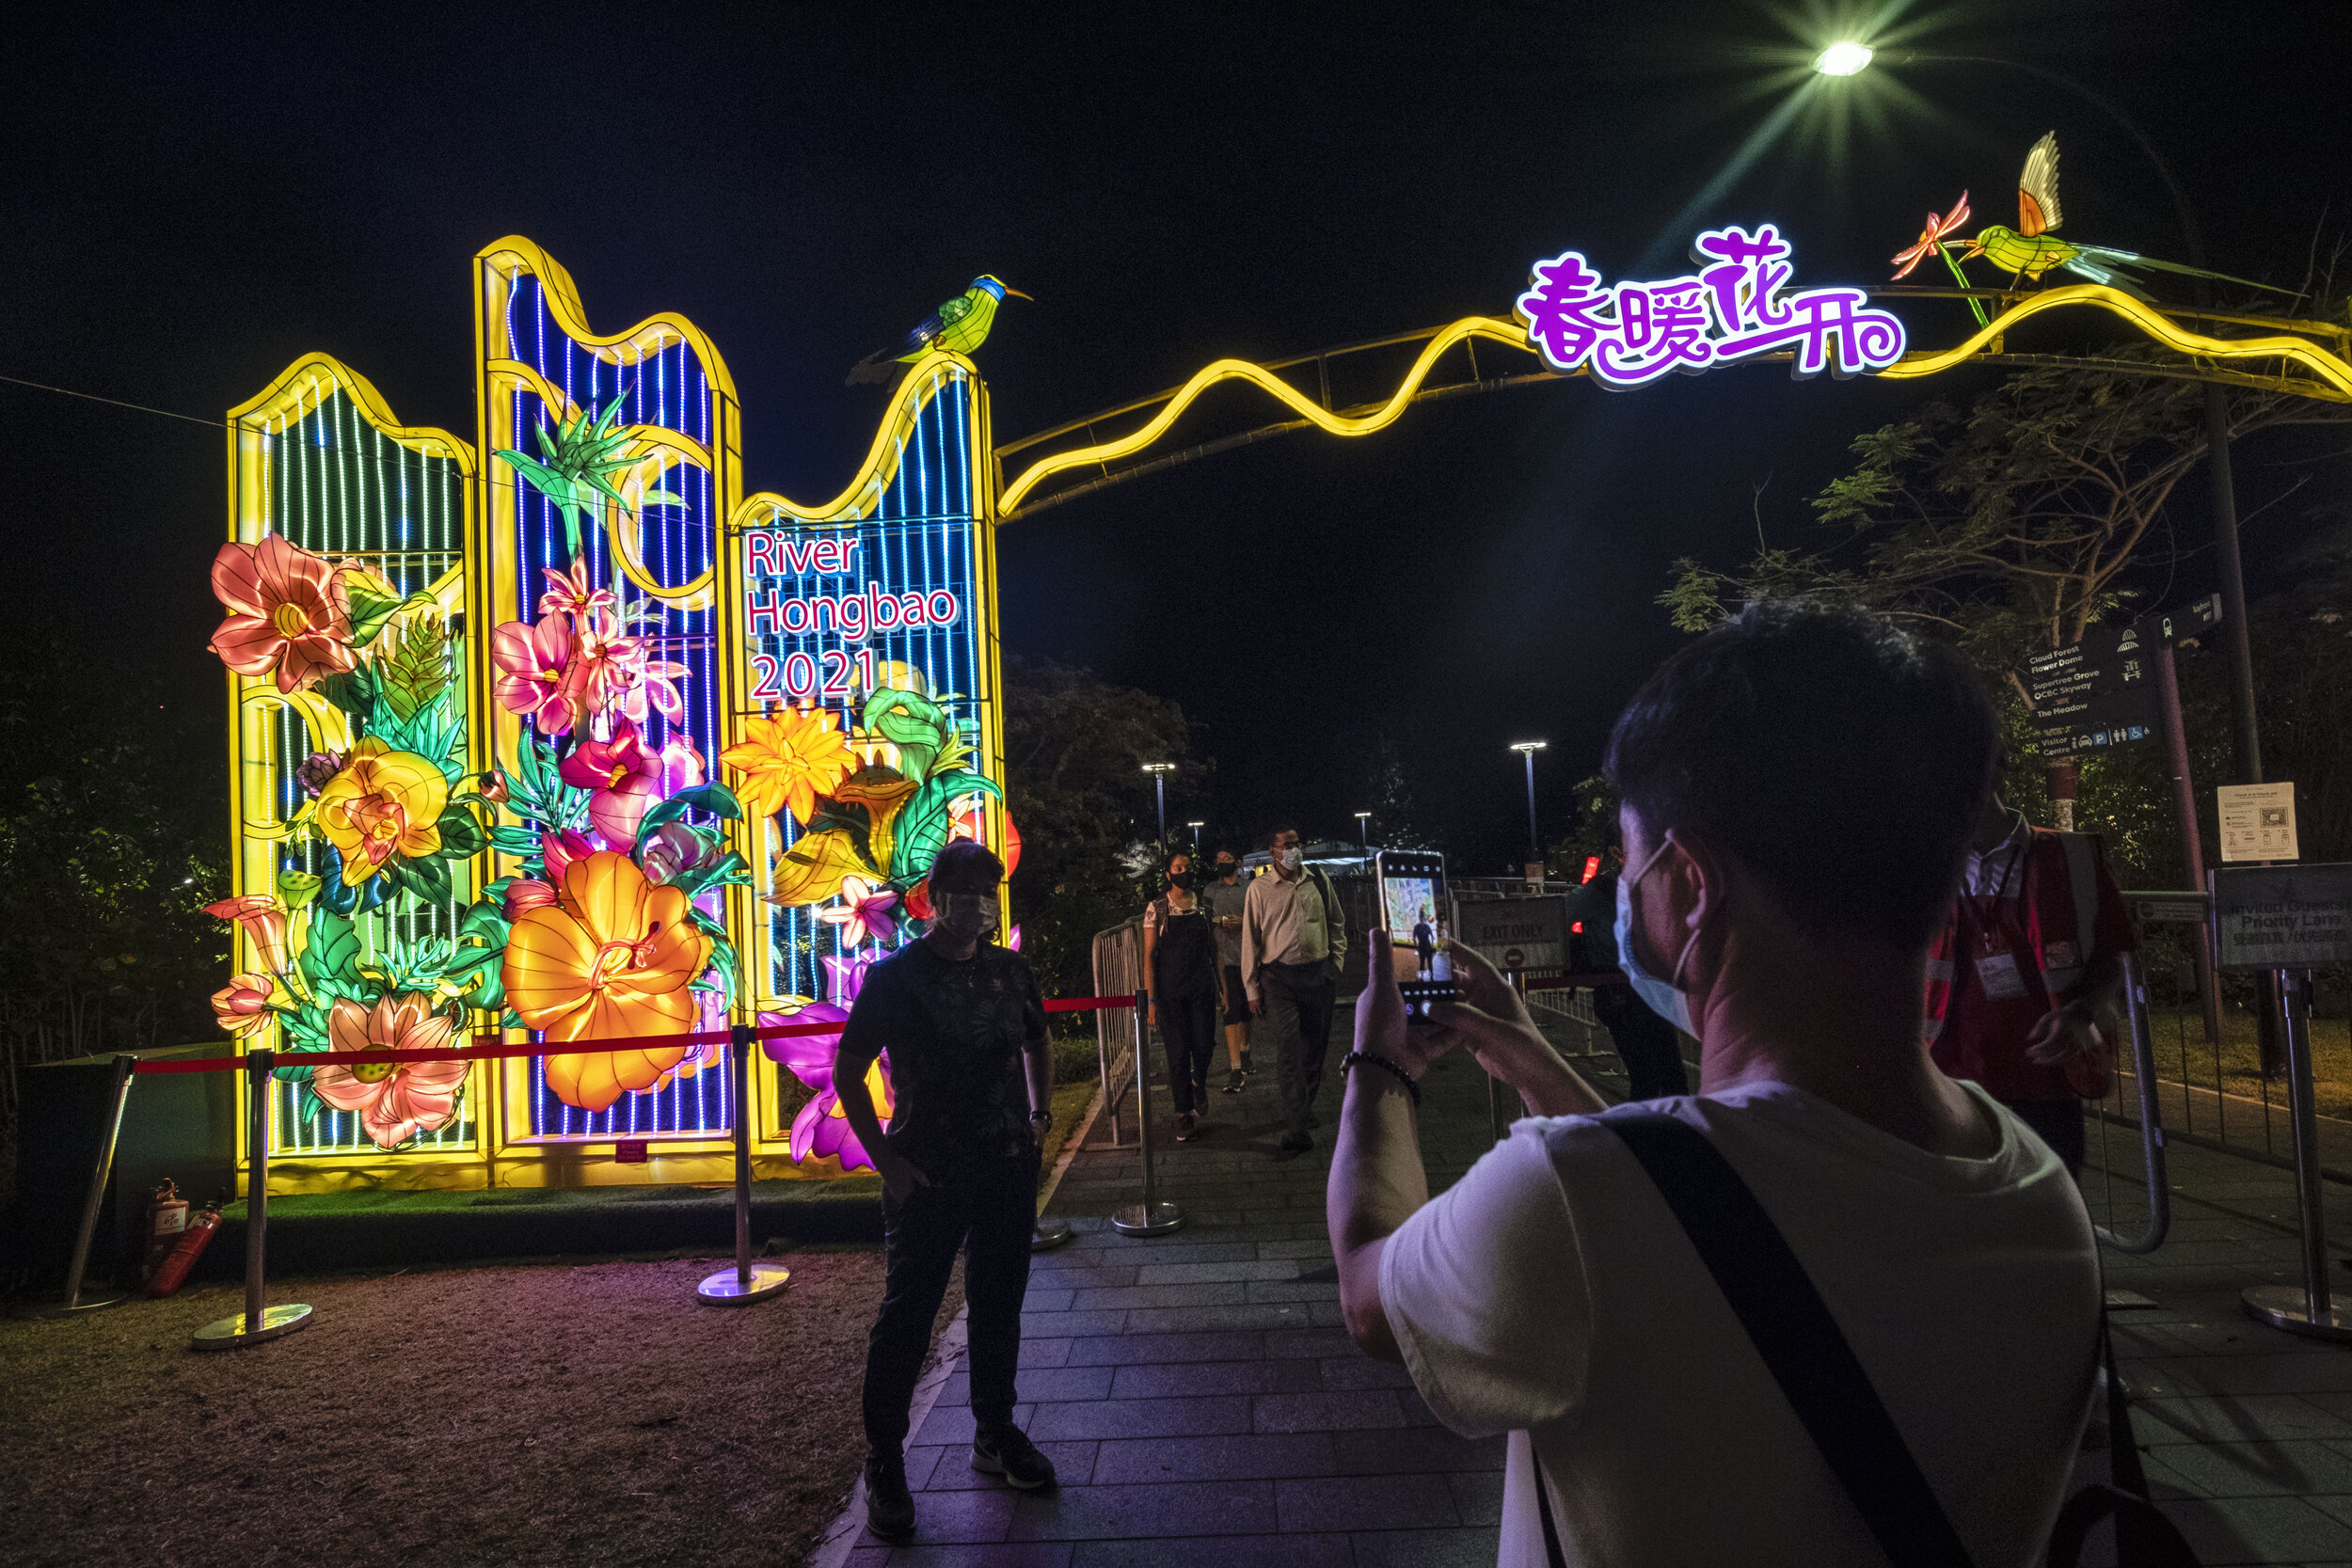  Visitors wearing face masks are seen at one of the entrances of the annual River Hongbao festival on the eve of the Chinese Lunar New Year of the Ox, otherwise known as the Spring Festival, at Singapore's Gardens by the Bay, February 11, 2021. REUTE